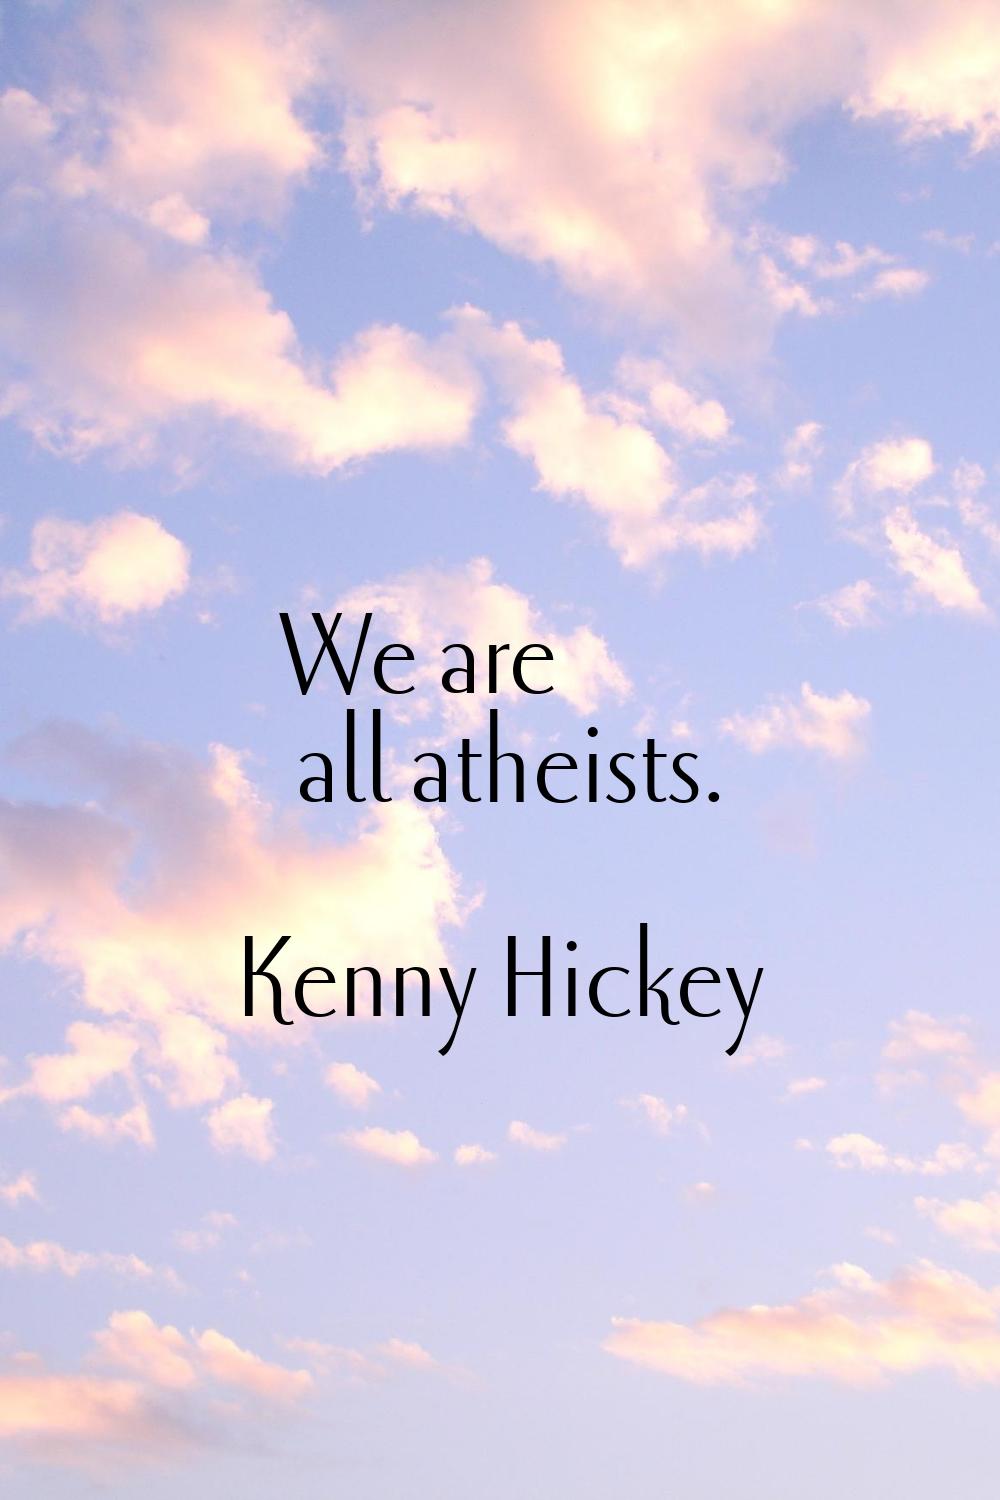 We are all atheists.